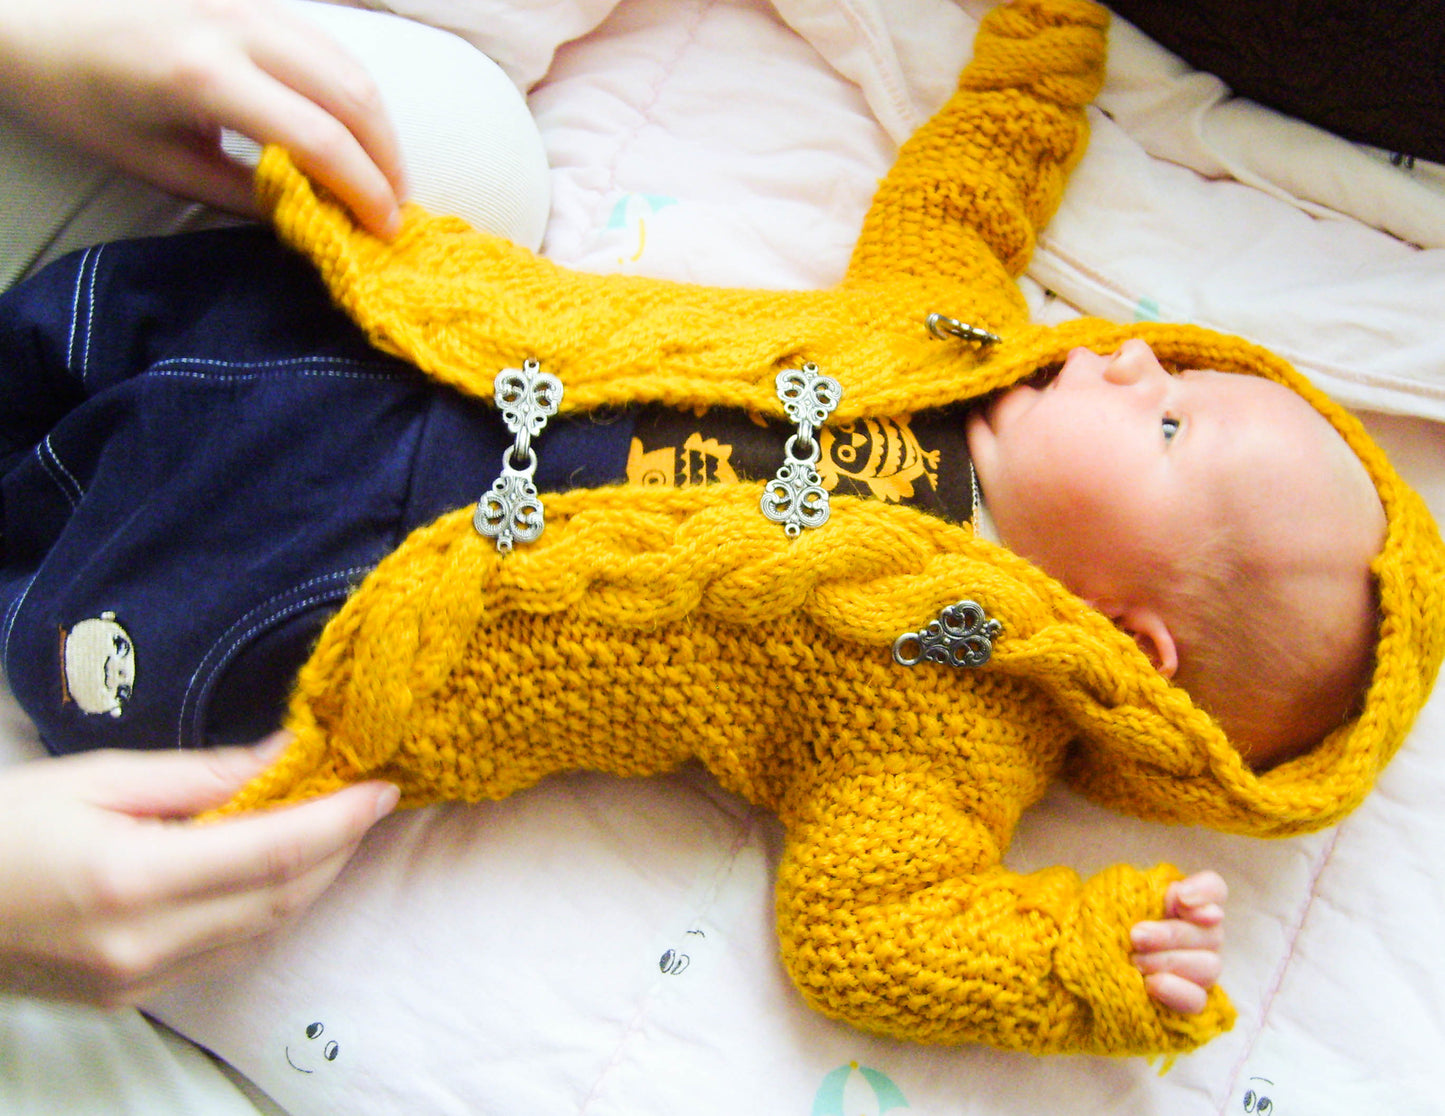 Tellervo - Cabled Baby Hooded Cardigan Knitting Pattern